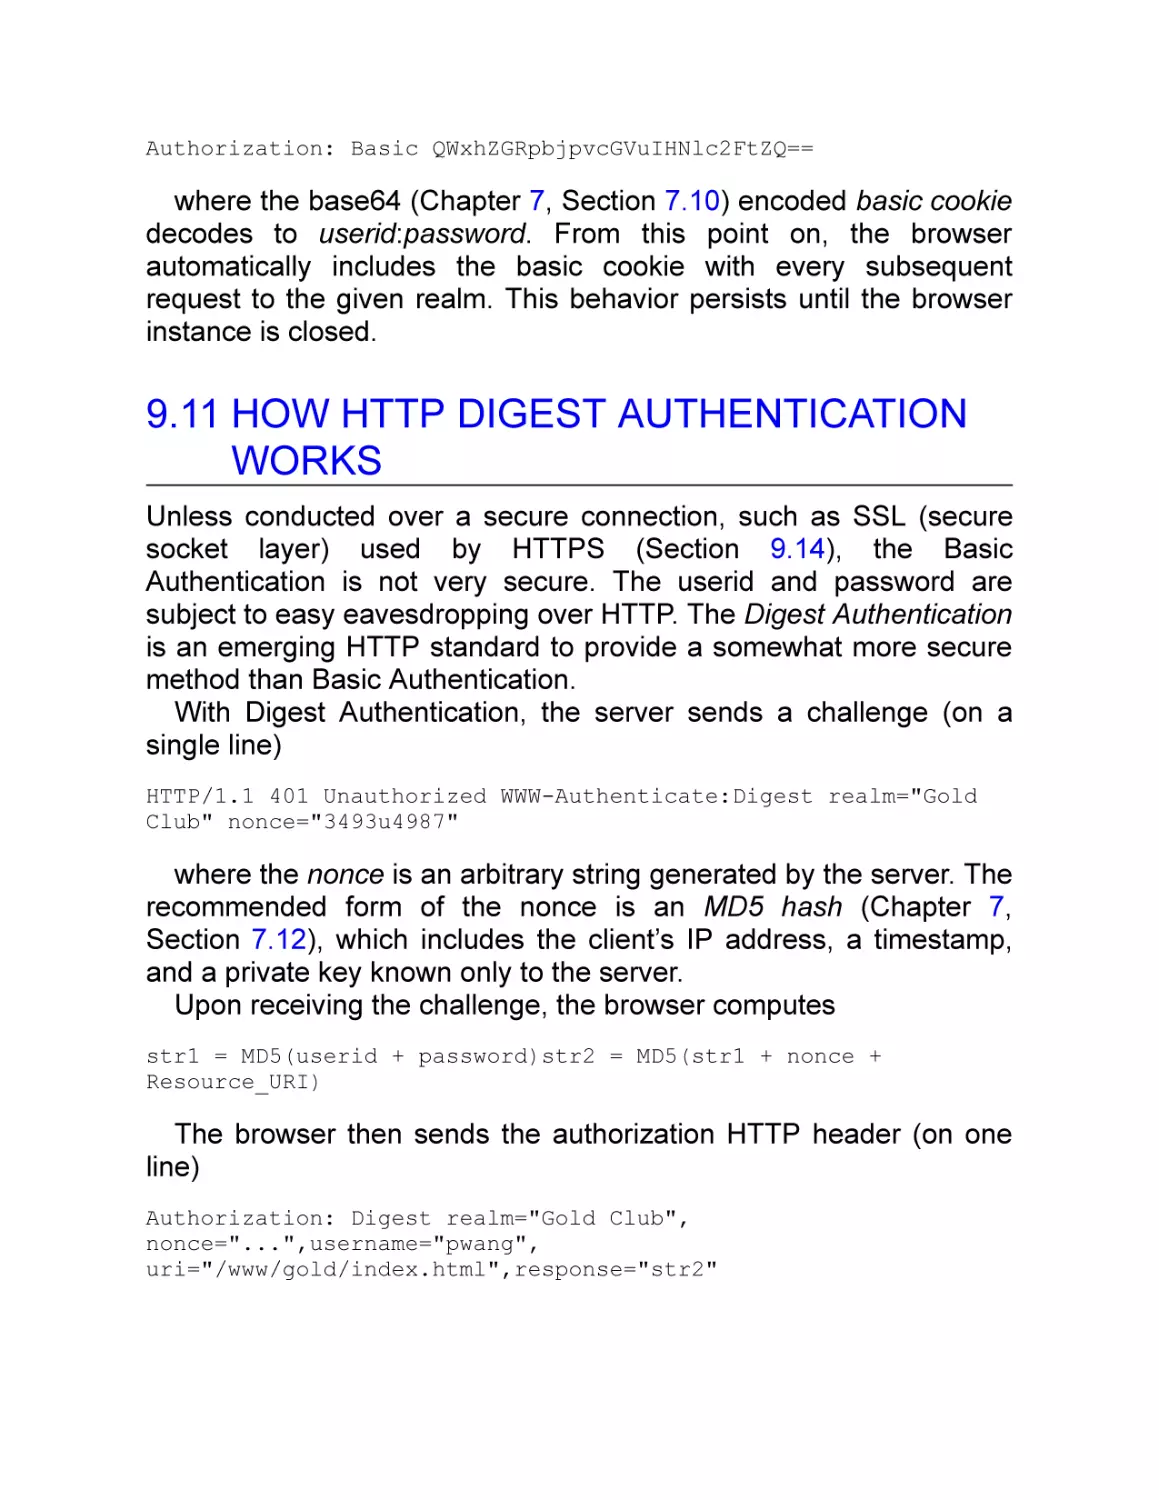 9.11 How HTTP Digest Authentication Works